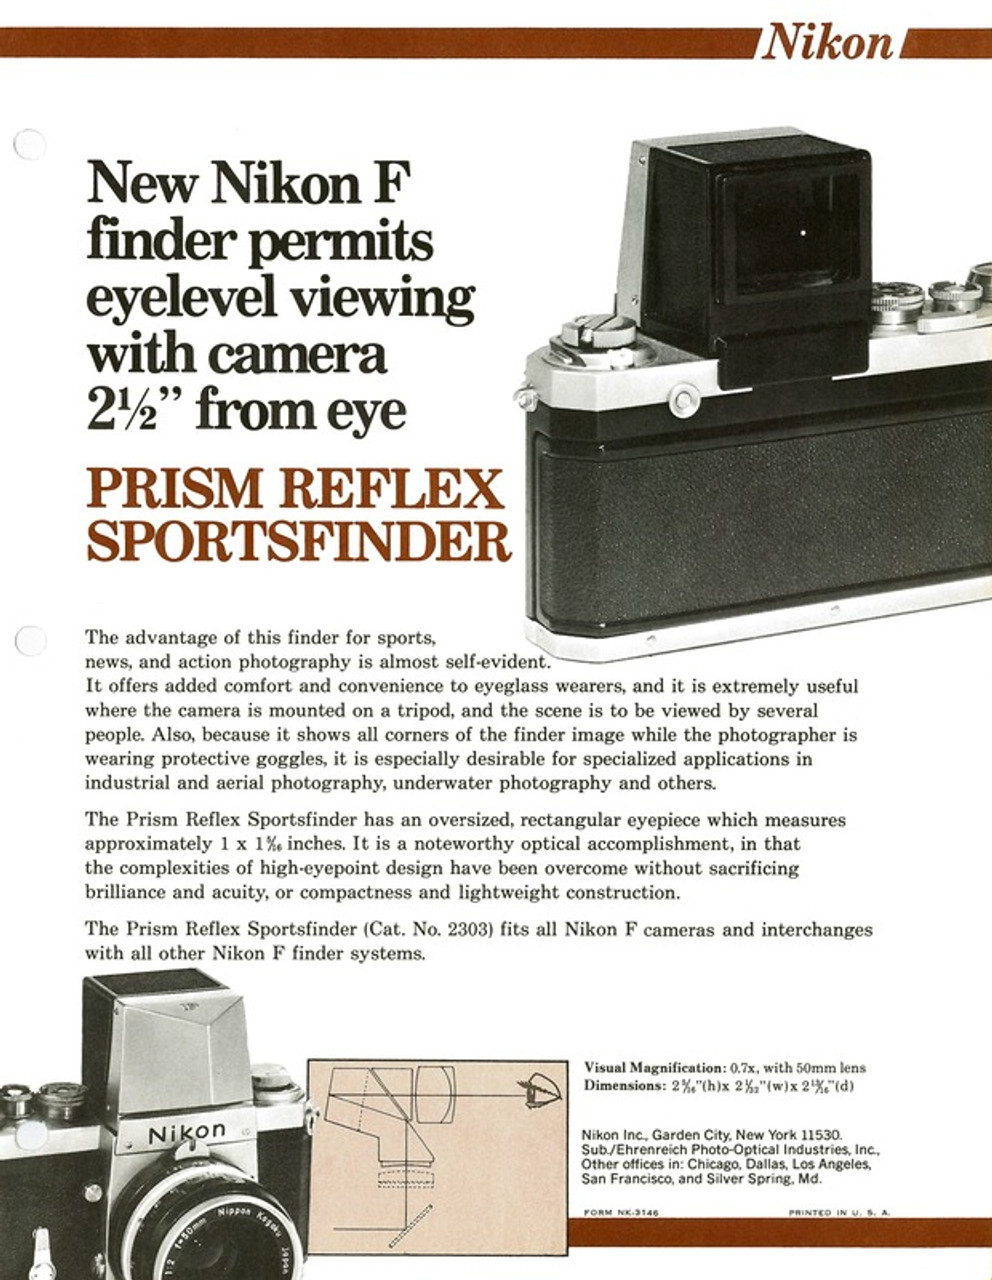 Nikon F Photomic FTn, Nikon F System Interchangeable Finders and Finder Accessories 1973 Sales Sheets - Free Download